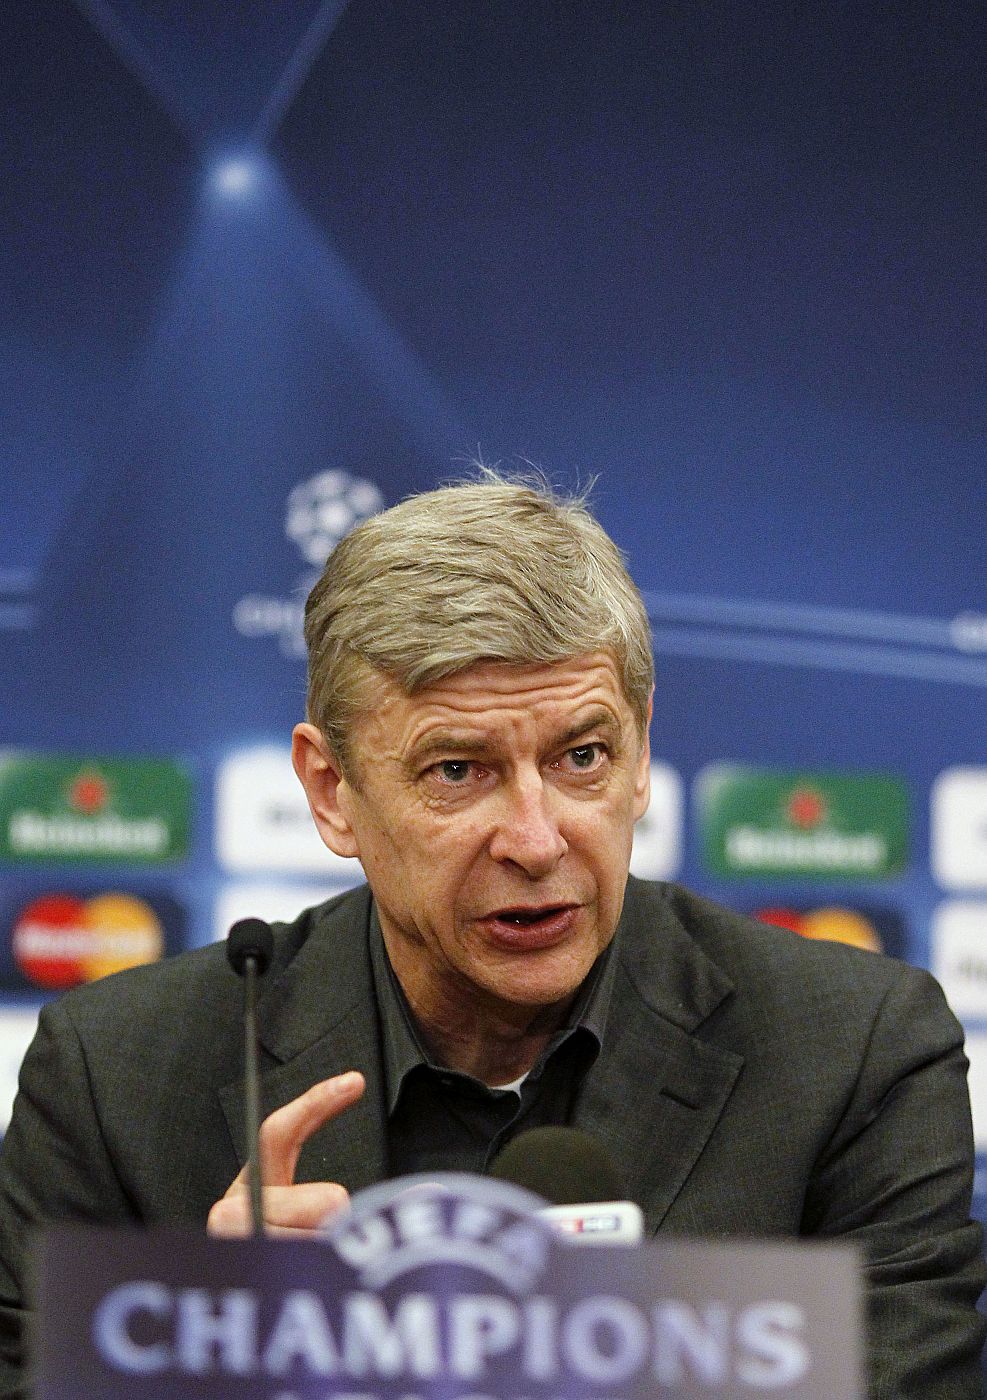 Arsenal's coach Wenger answers a question during a news conference in Porto